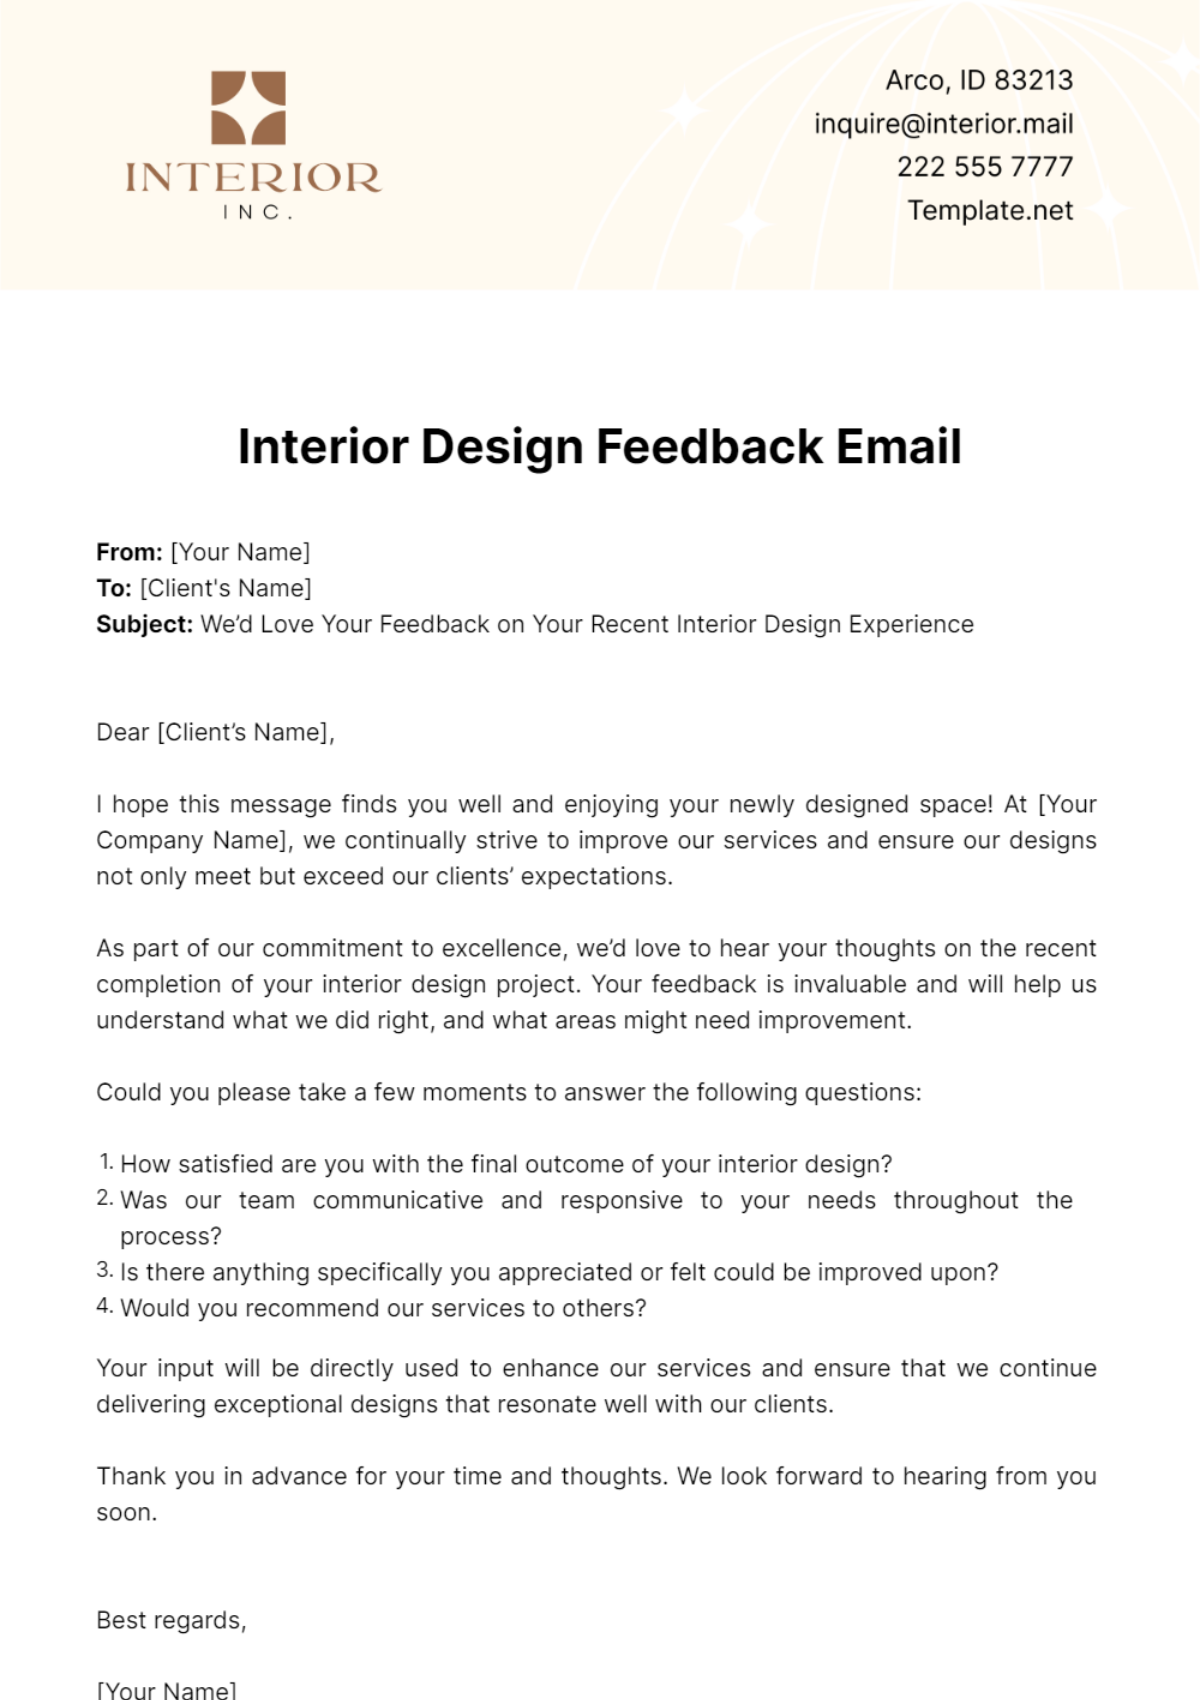 Free Interior Design Feedback Email Template